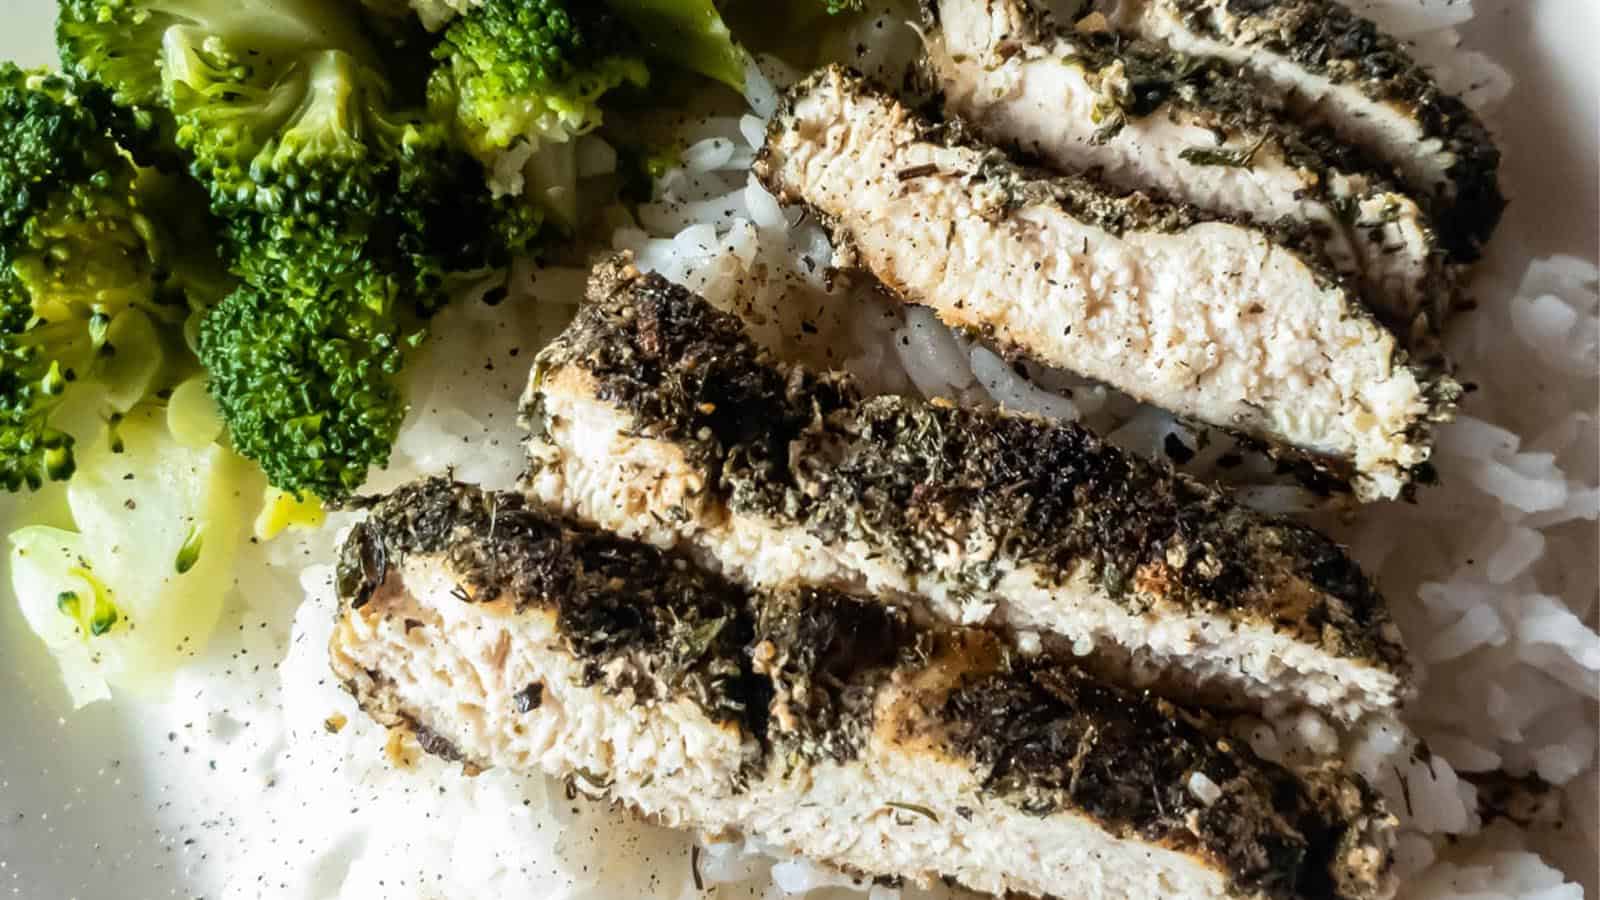 <p>Recreate the Texas Roadhouse experience with this Herb-Crusted Chicken. It’s a low-carb dish that’s big on flavor and low on difficulty. Even if you’re not savvy in the kitchen, this recipe will make you feel like a star chef!<br><strong>Get the Recipe: </strong><a href="https://www.easyhomemadelife.com/herb-crusted-chicken/?utm_source=msn&utm_medium=page&utm_campaign=msn">Herb-Crusted Chicken</a></p>